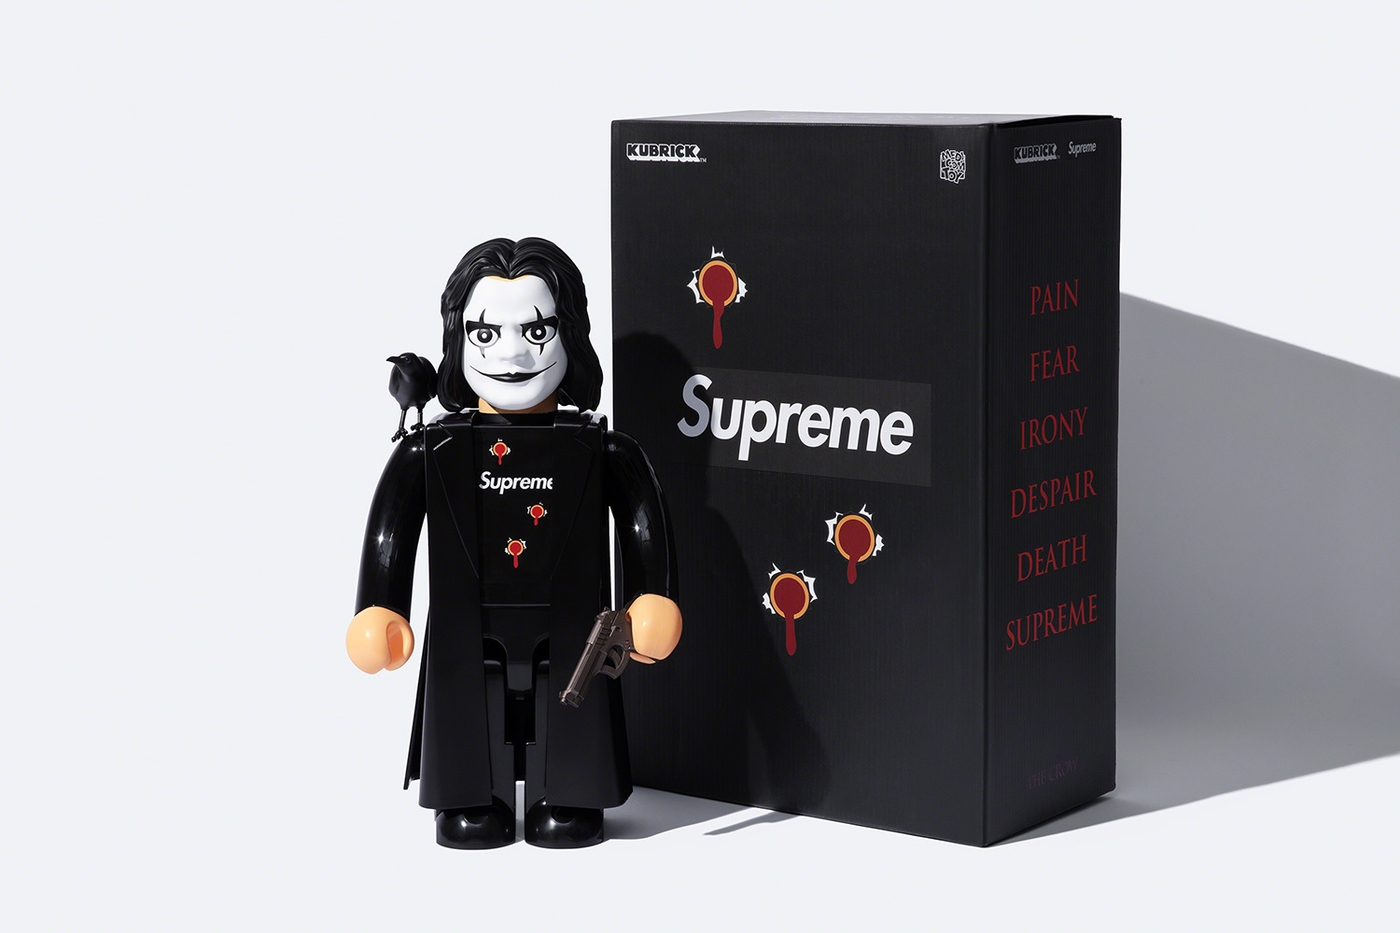 KUBRICK 1000%. © 2021 MEDICOM TOY. Made exclusively for Supreme. (60/61)